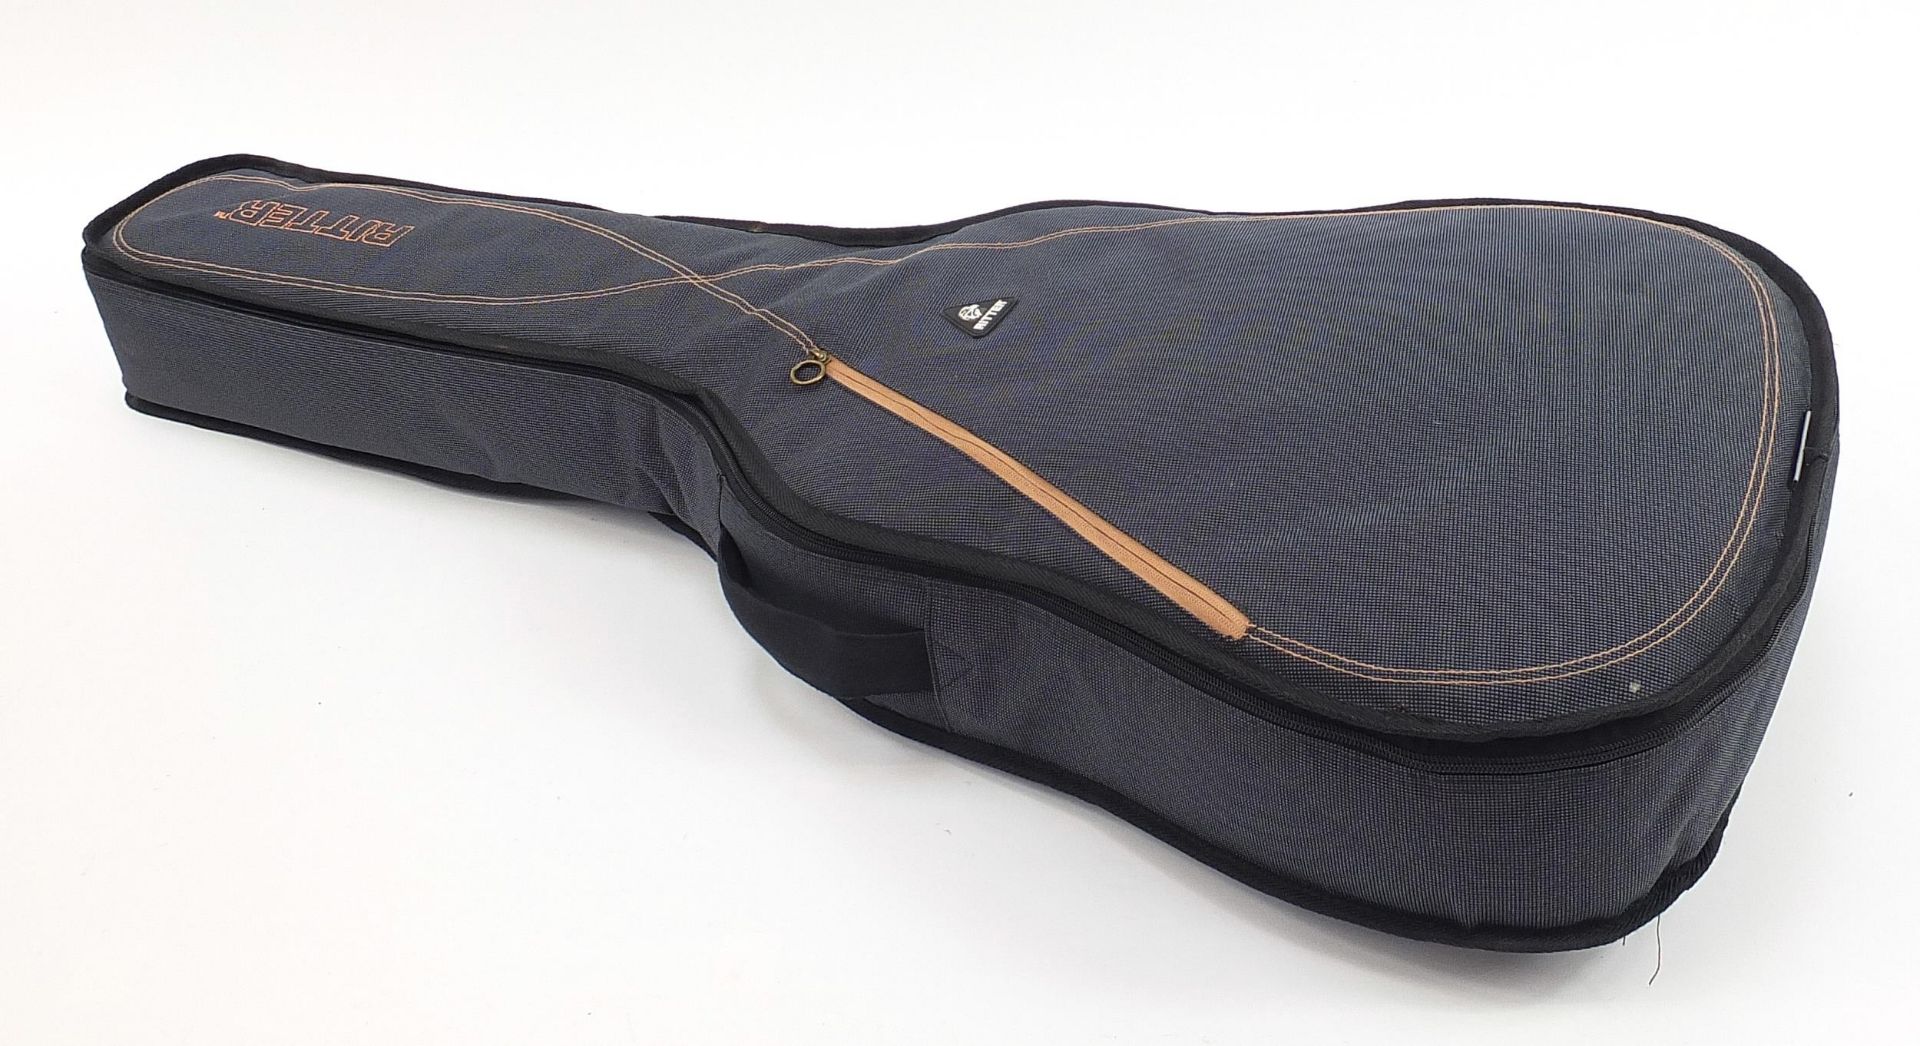 Cort six string acoustic guitar with Ritter case - Image 6 of 6